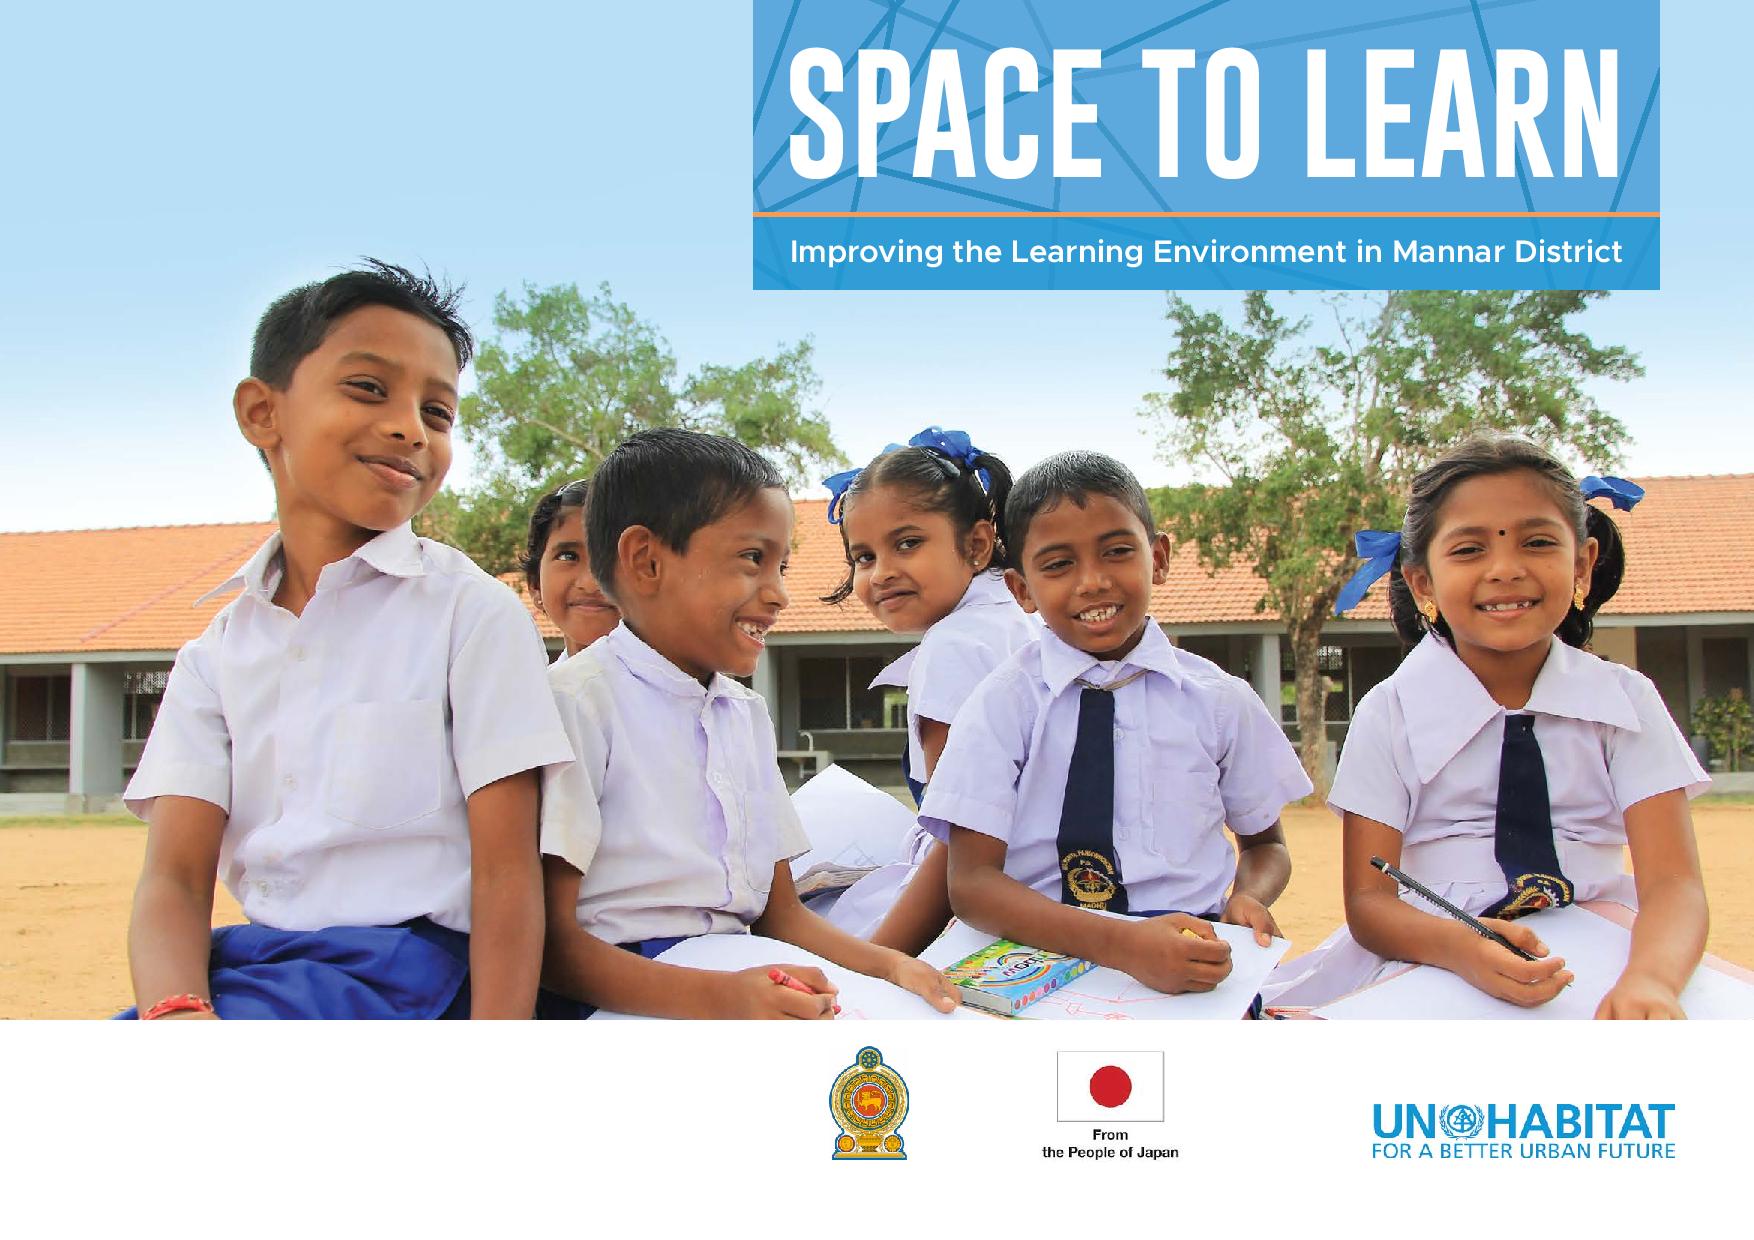 Sri Lanka Photobook: Space to Learn – Improving the Learning Environment in Mannar District